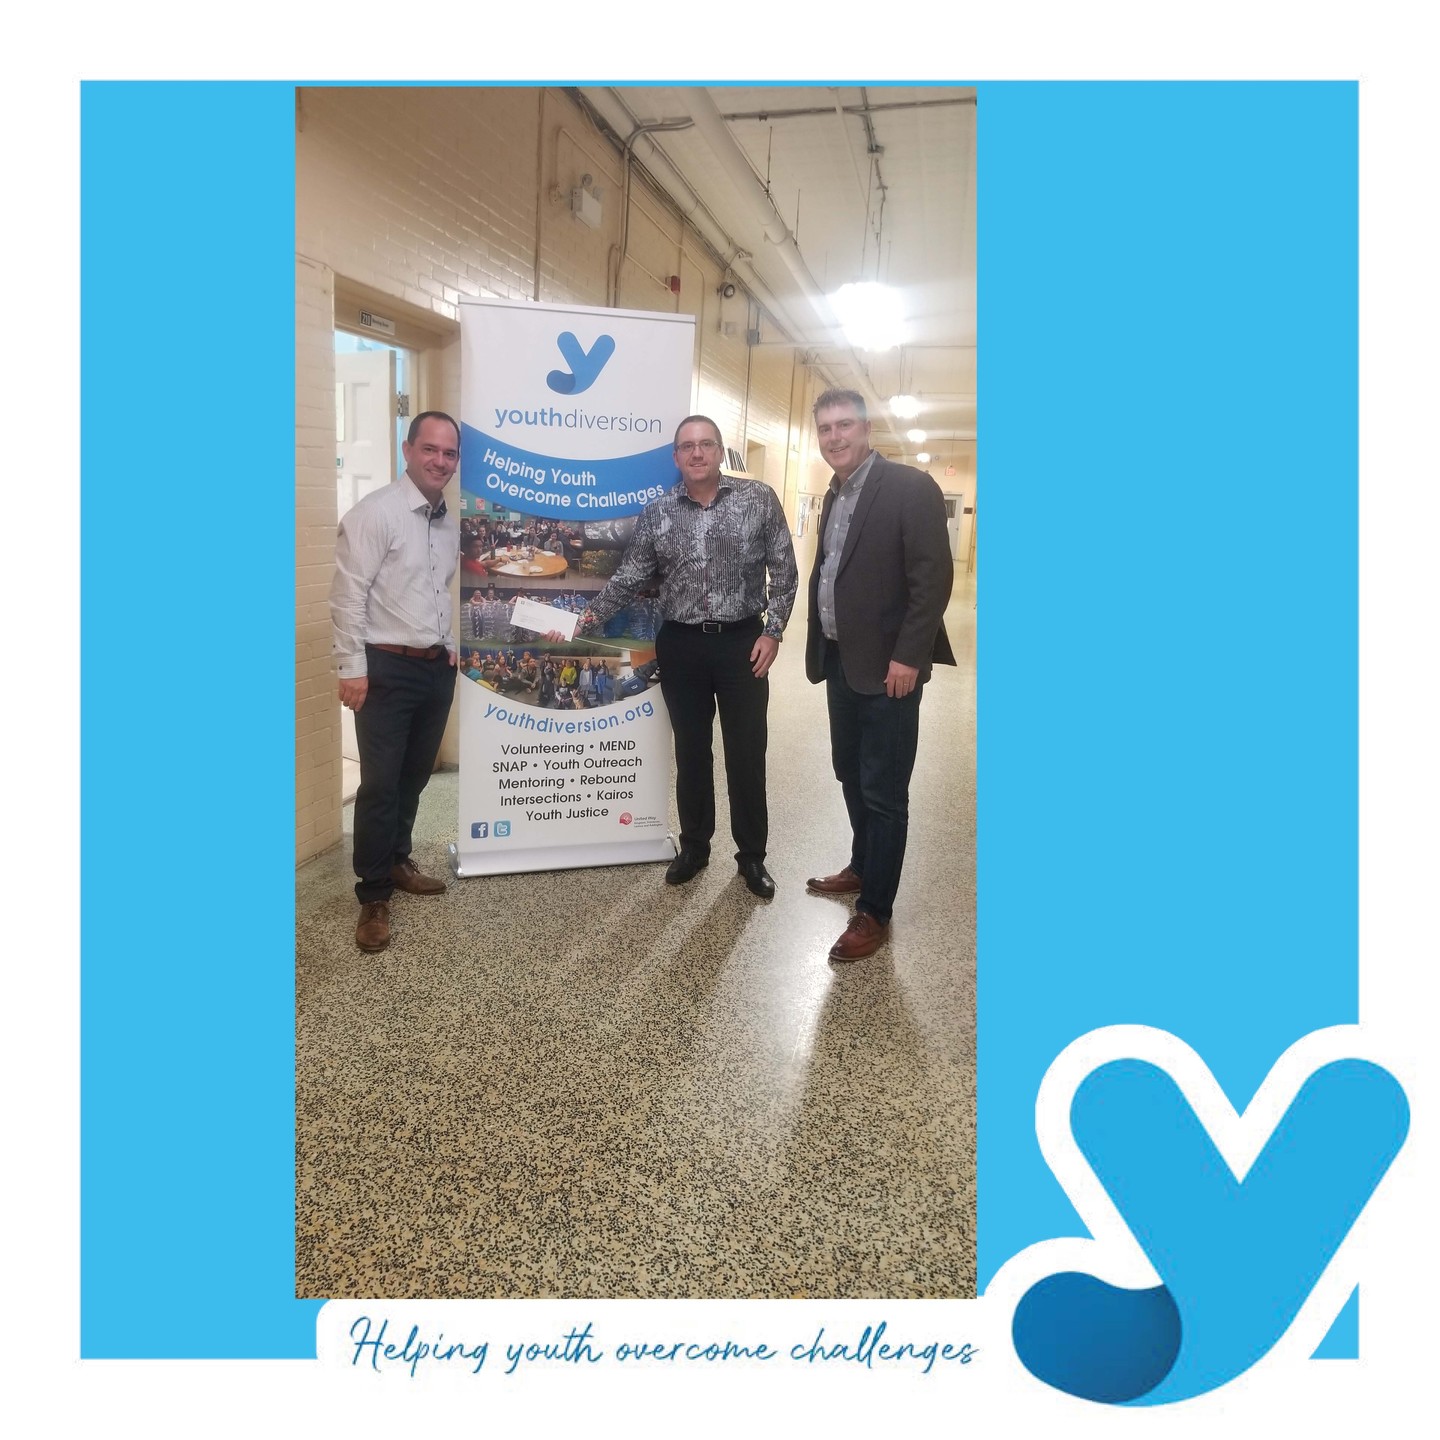 We can't thanks these two gentlemen enough for their hard work this past summer with the Lobsterfest. We were told that we would receive $500 when in fact Phil Archambault and Jeff Easton just presented us with a cheque in the amount of $2,000. Through the lens of prevention, this is worth $20,000. Thanks to all who supported this year's Lobsterfest.